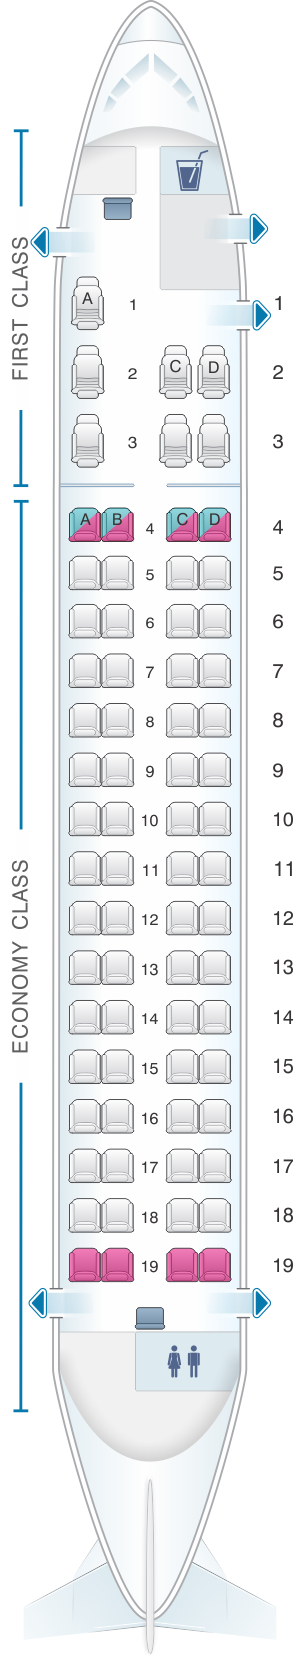 Seat map for Island Air Bombardier Q400